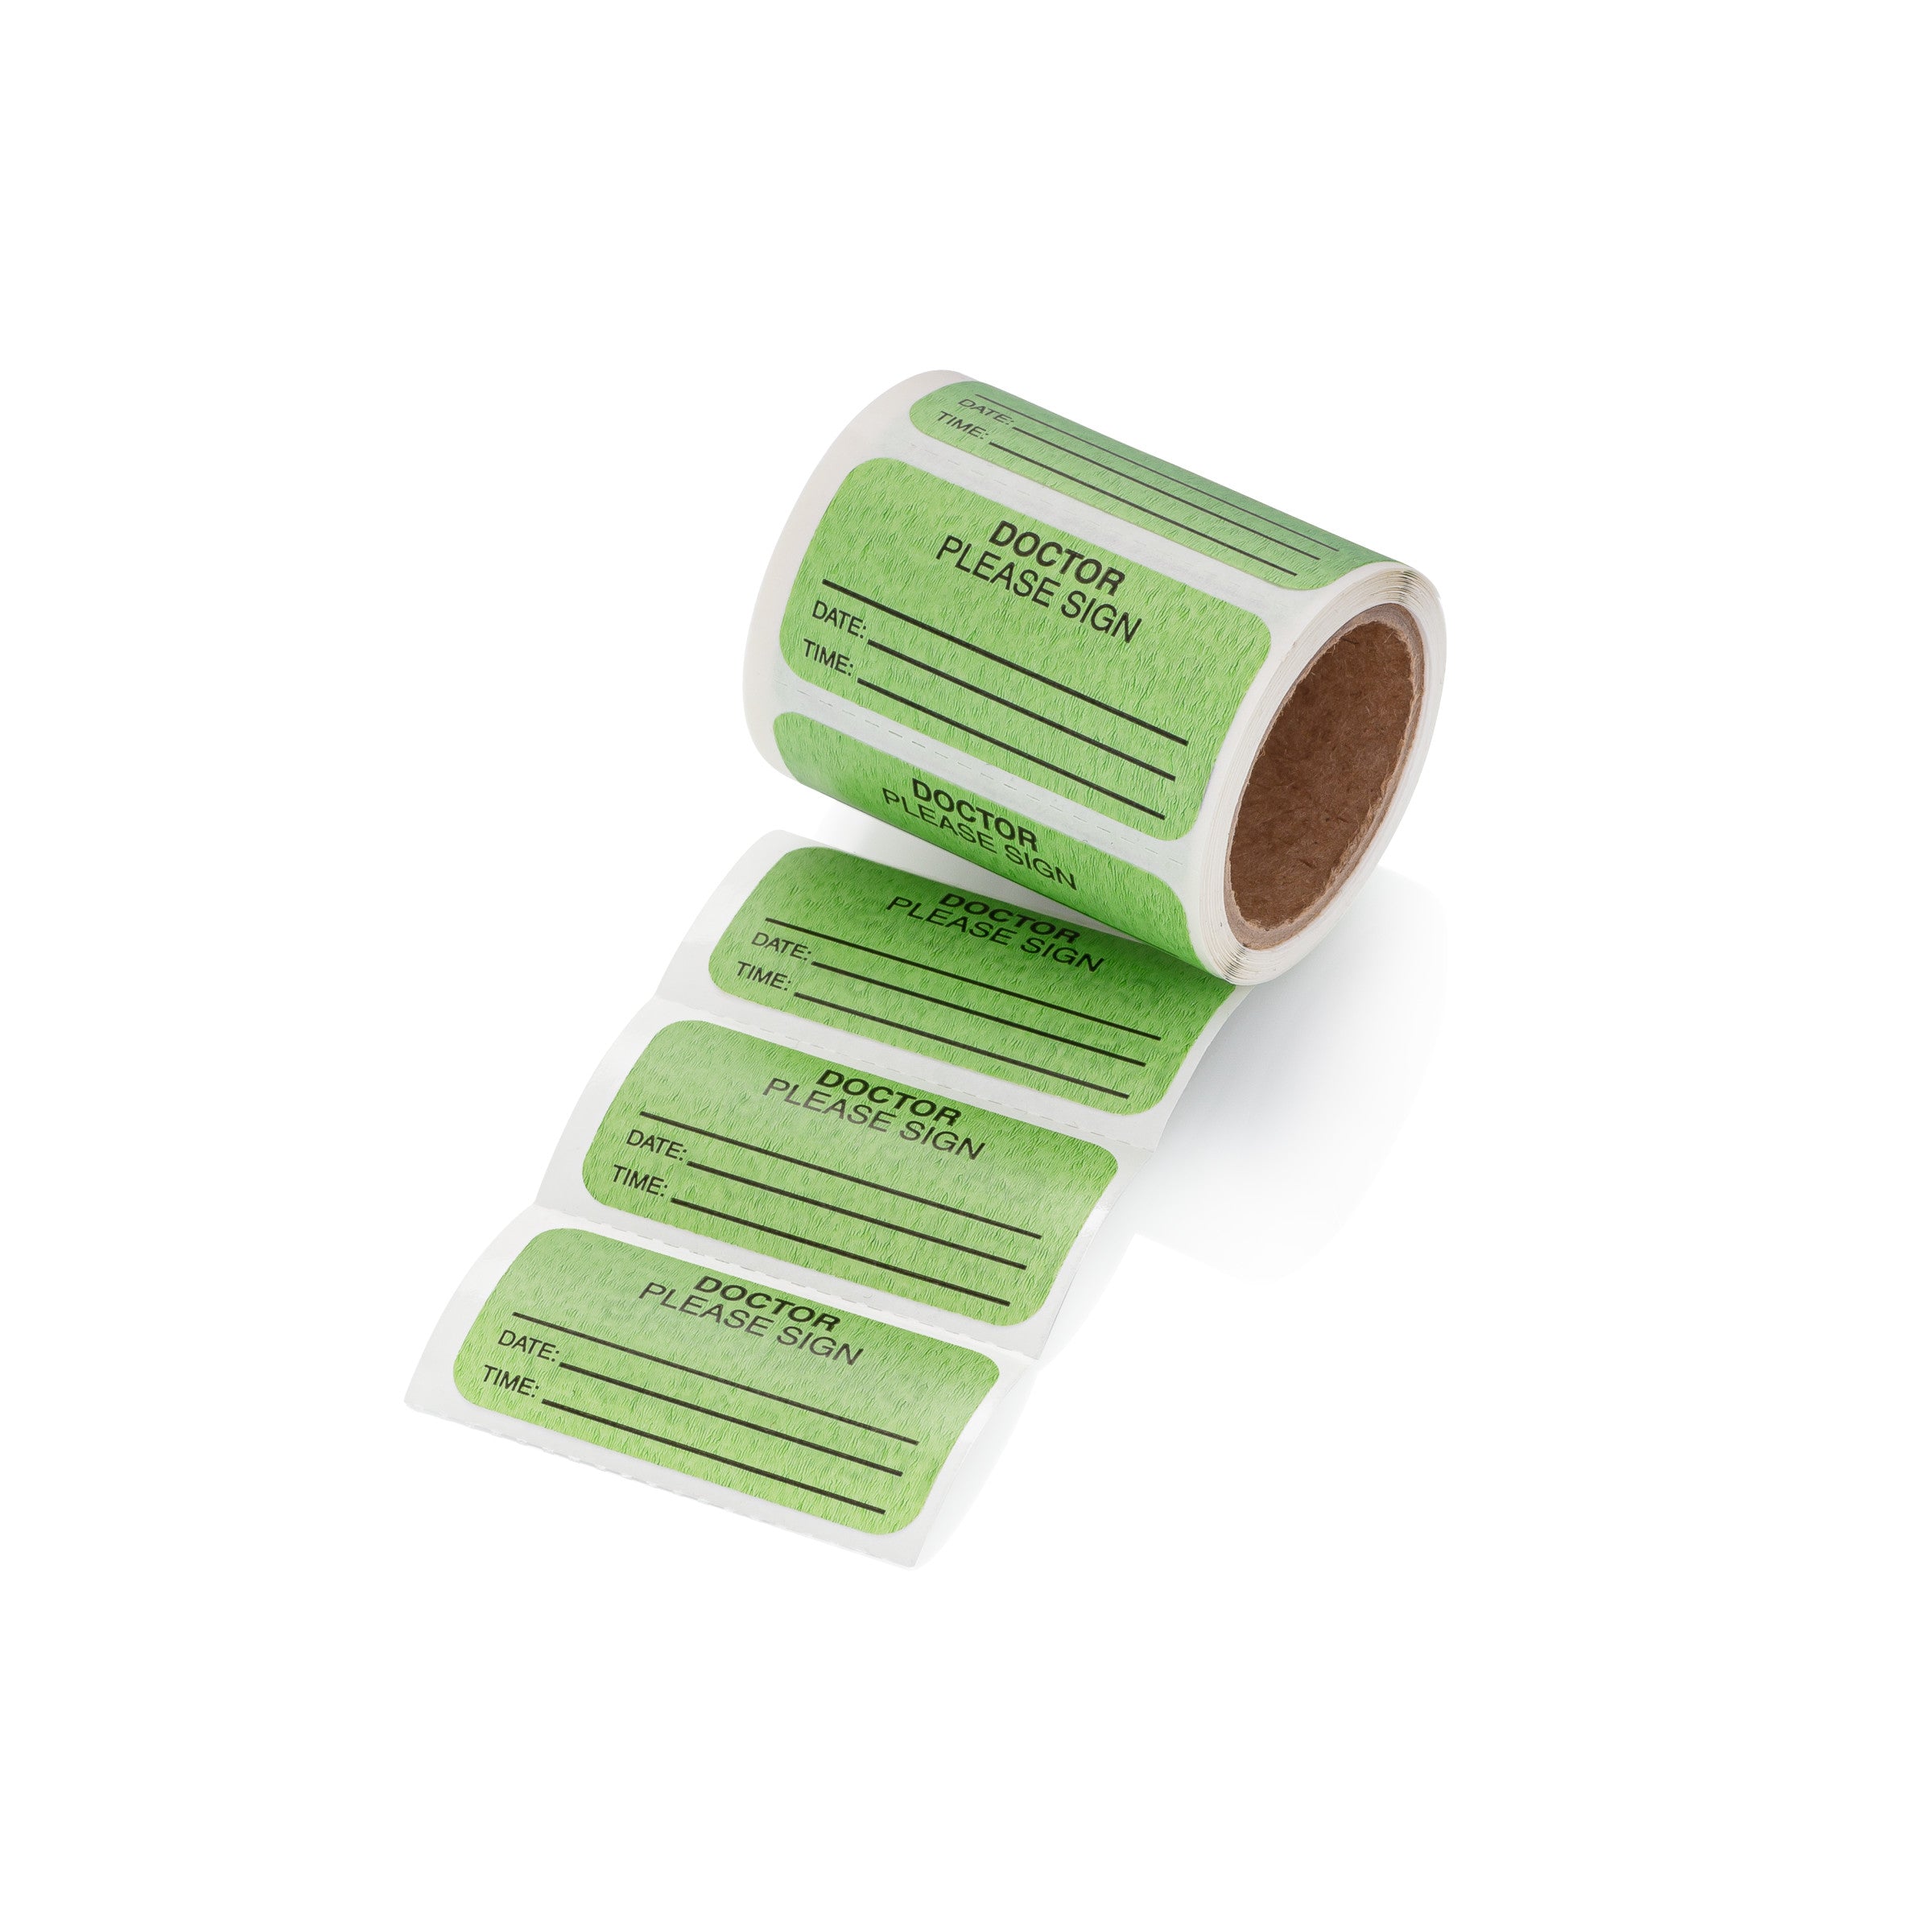 Doctor Please Sign Alert and Instruction Labels, Green, W1.5" x H.75" (Roll of 100)